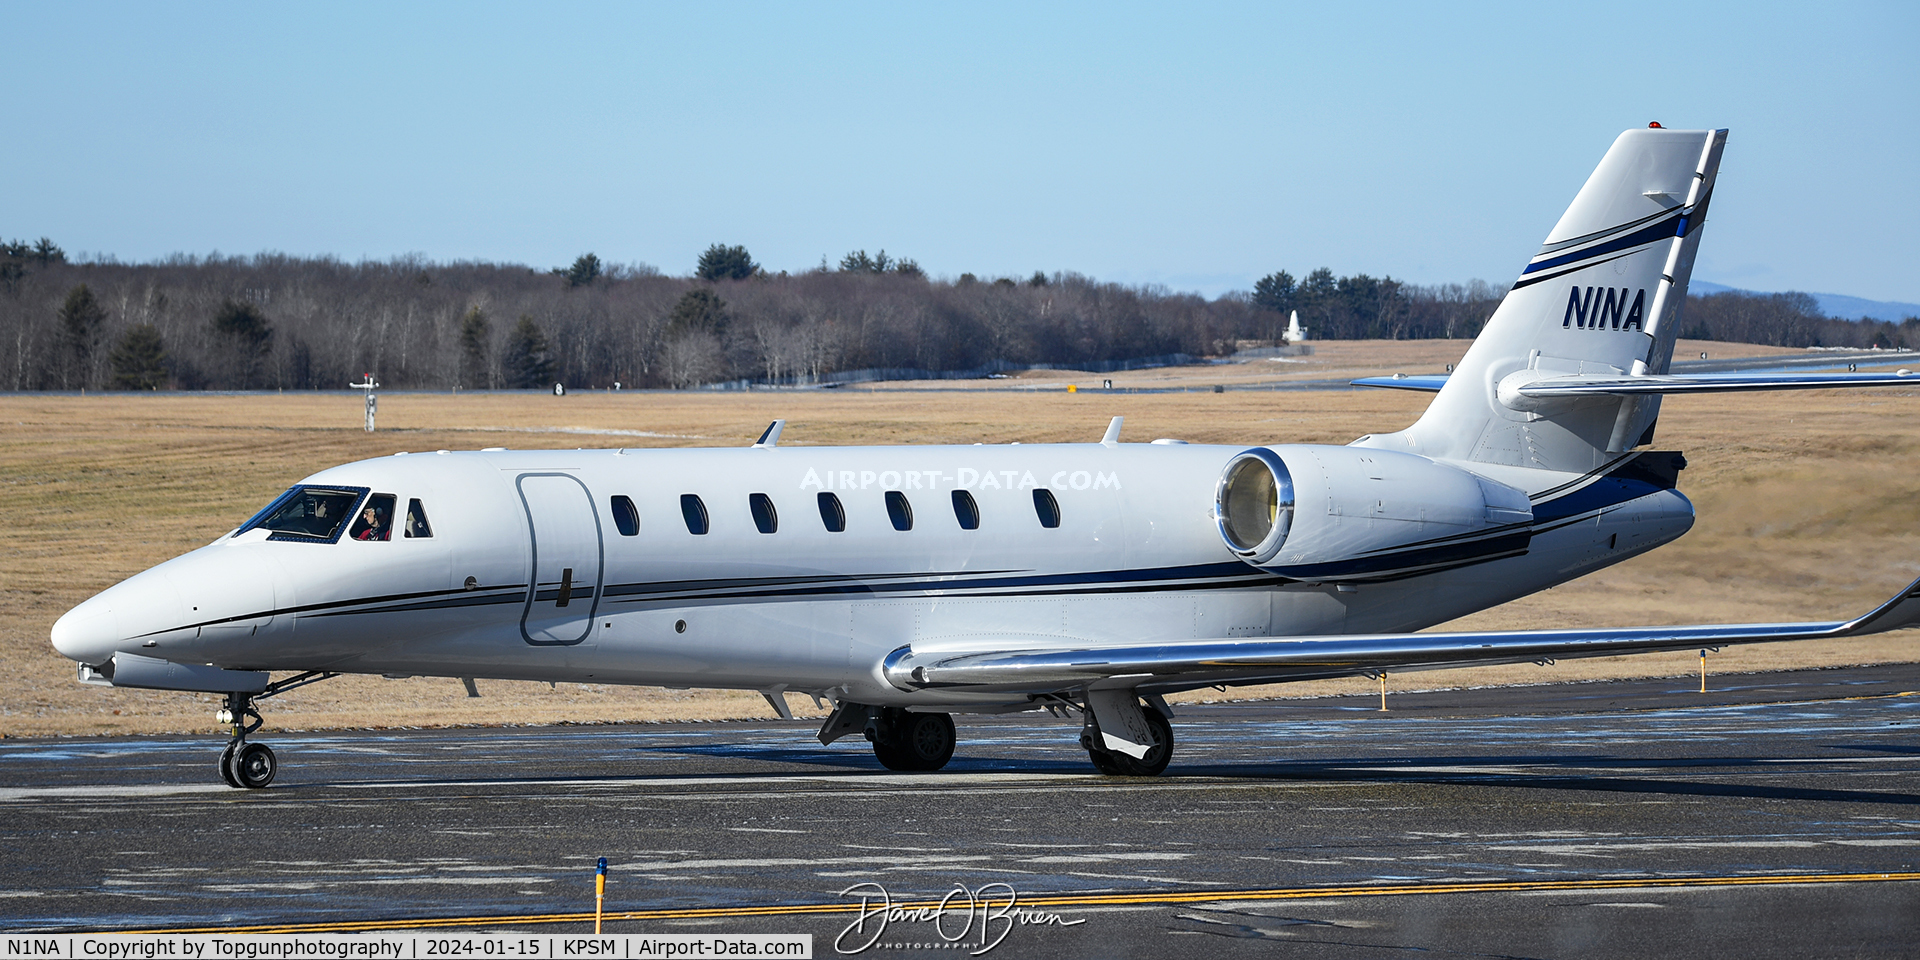 N1NA, 2007 Cessna 680 Citation Sovereign C/N 680-0141, taxiing up to RW34